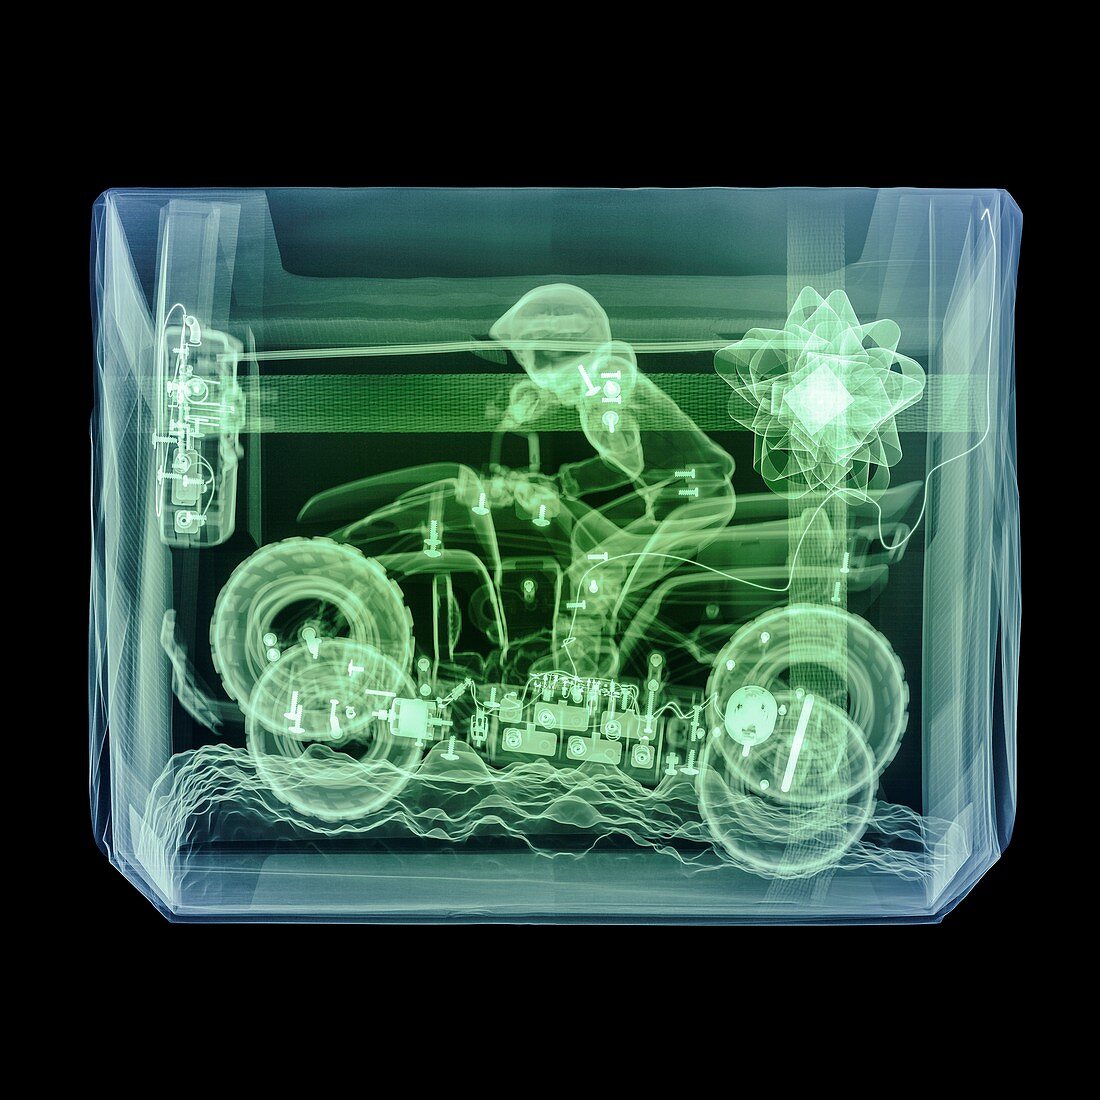 Coloured x-ray of a toy